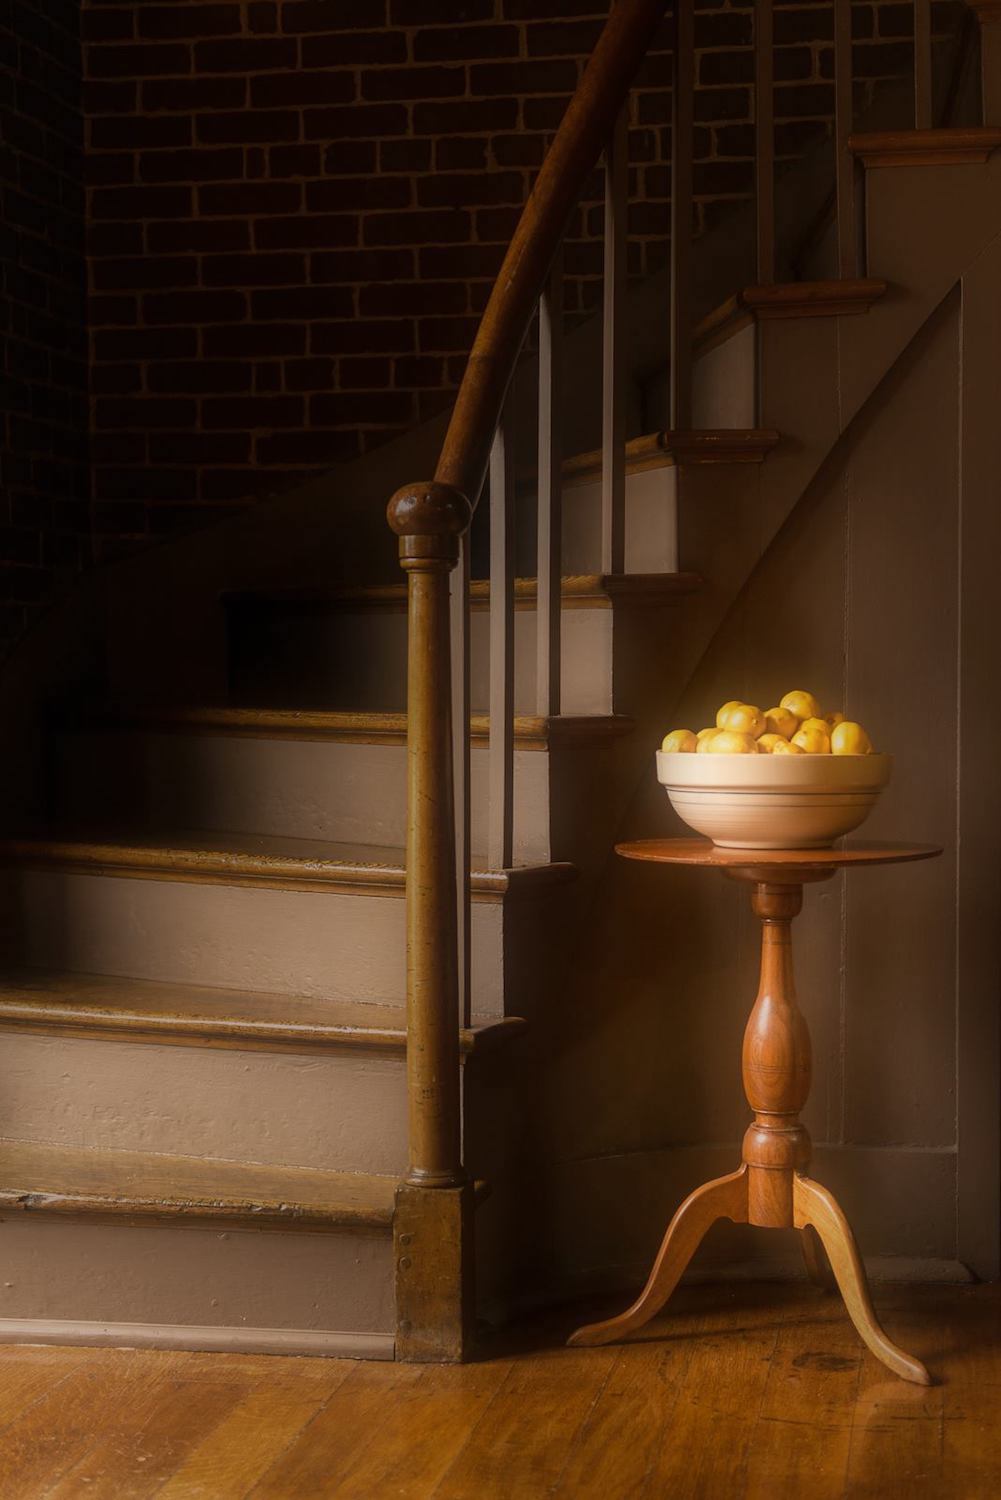 Shaker Village staircase with lemons